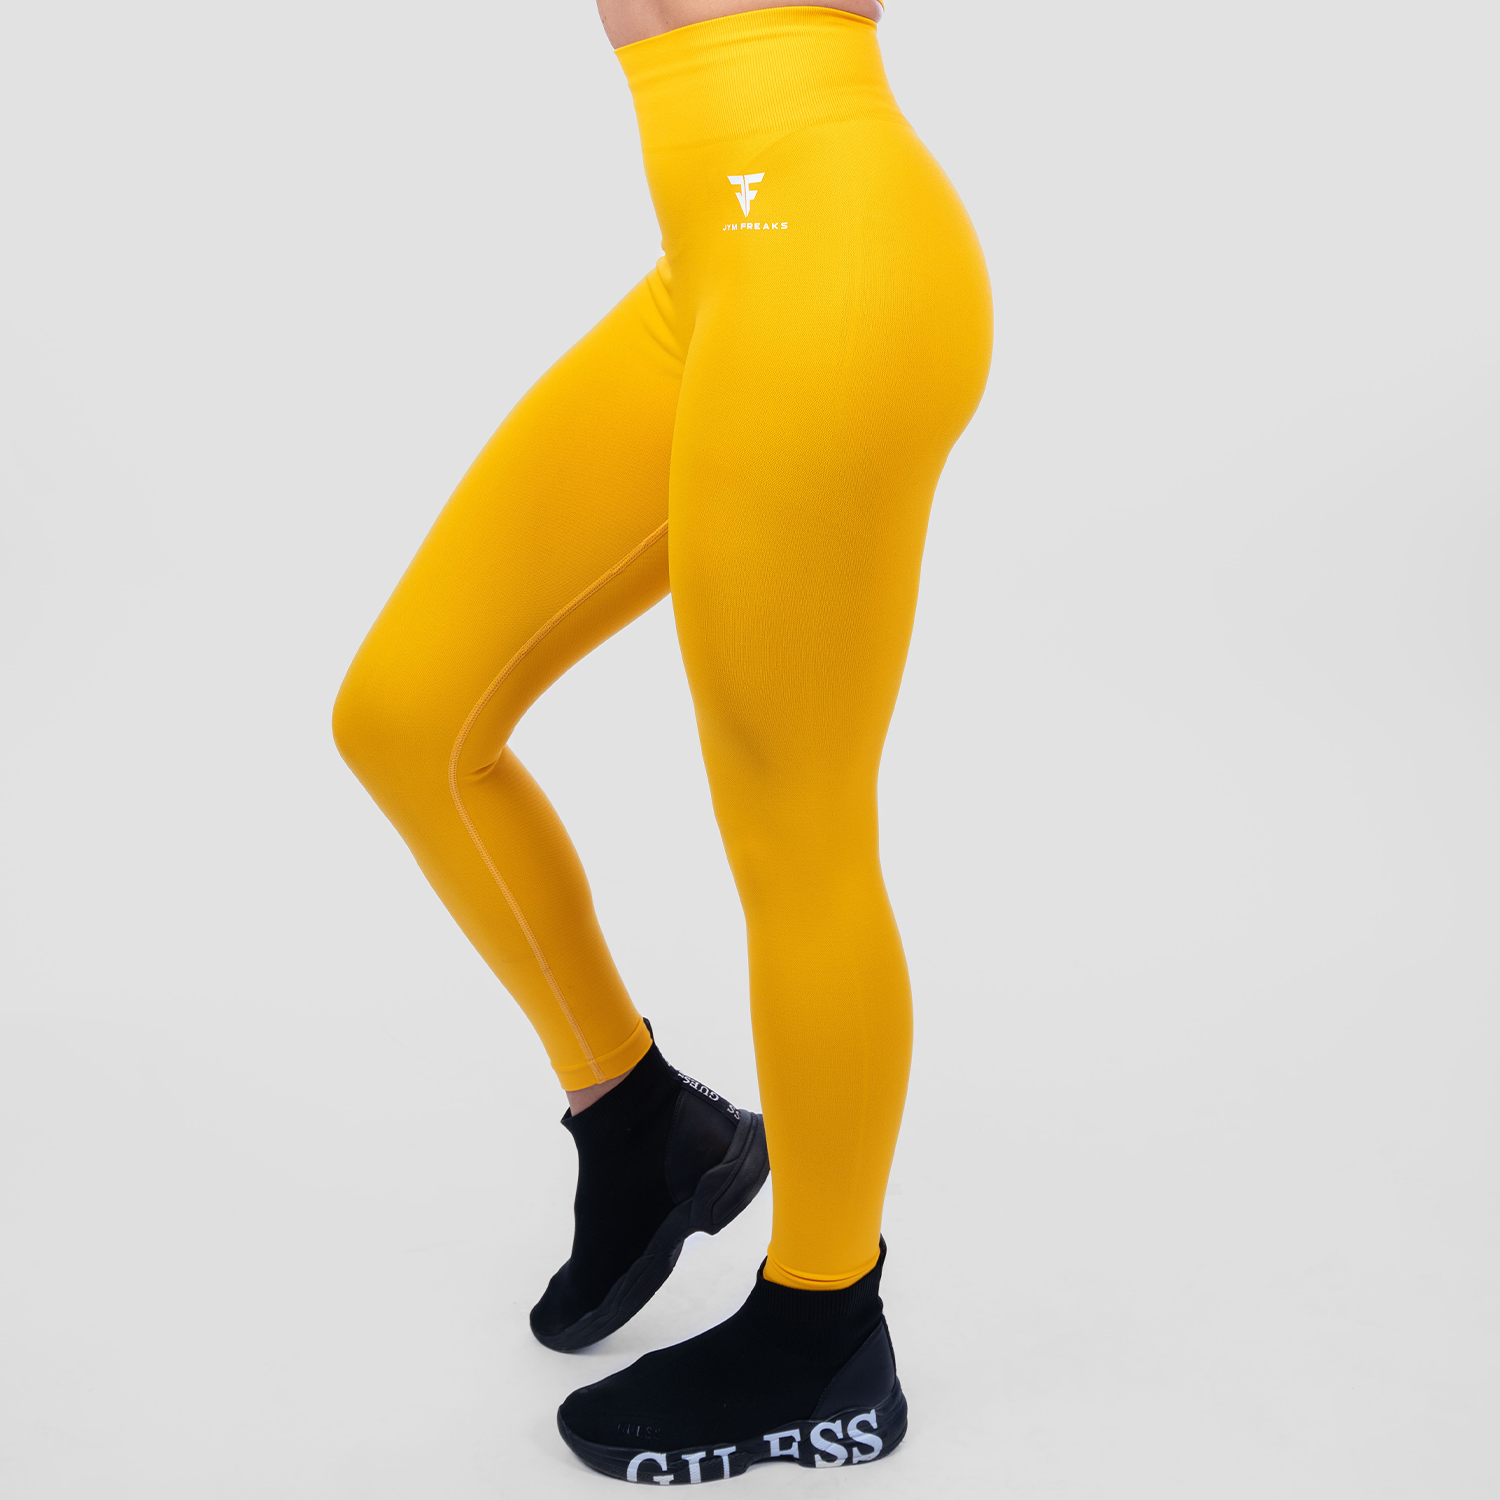 One0one - The hottest leggings you'll ever own 🤩 iSPARKLE YELLOW